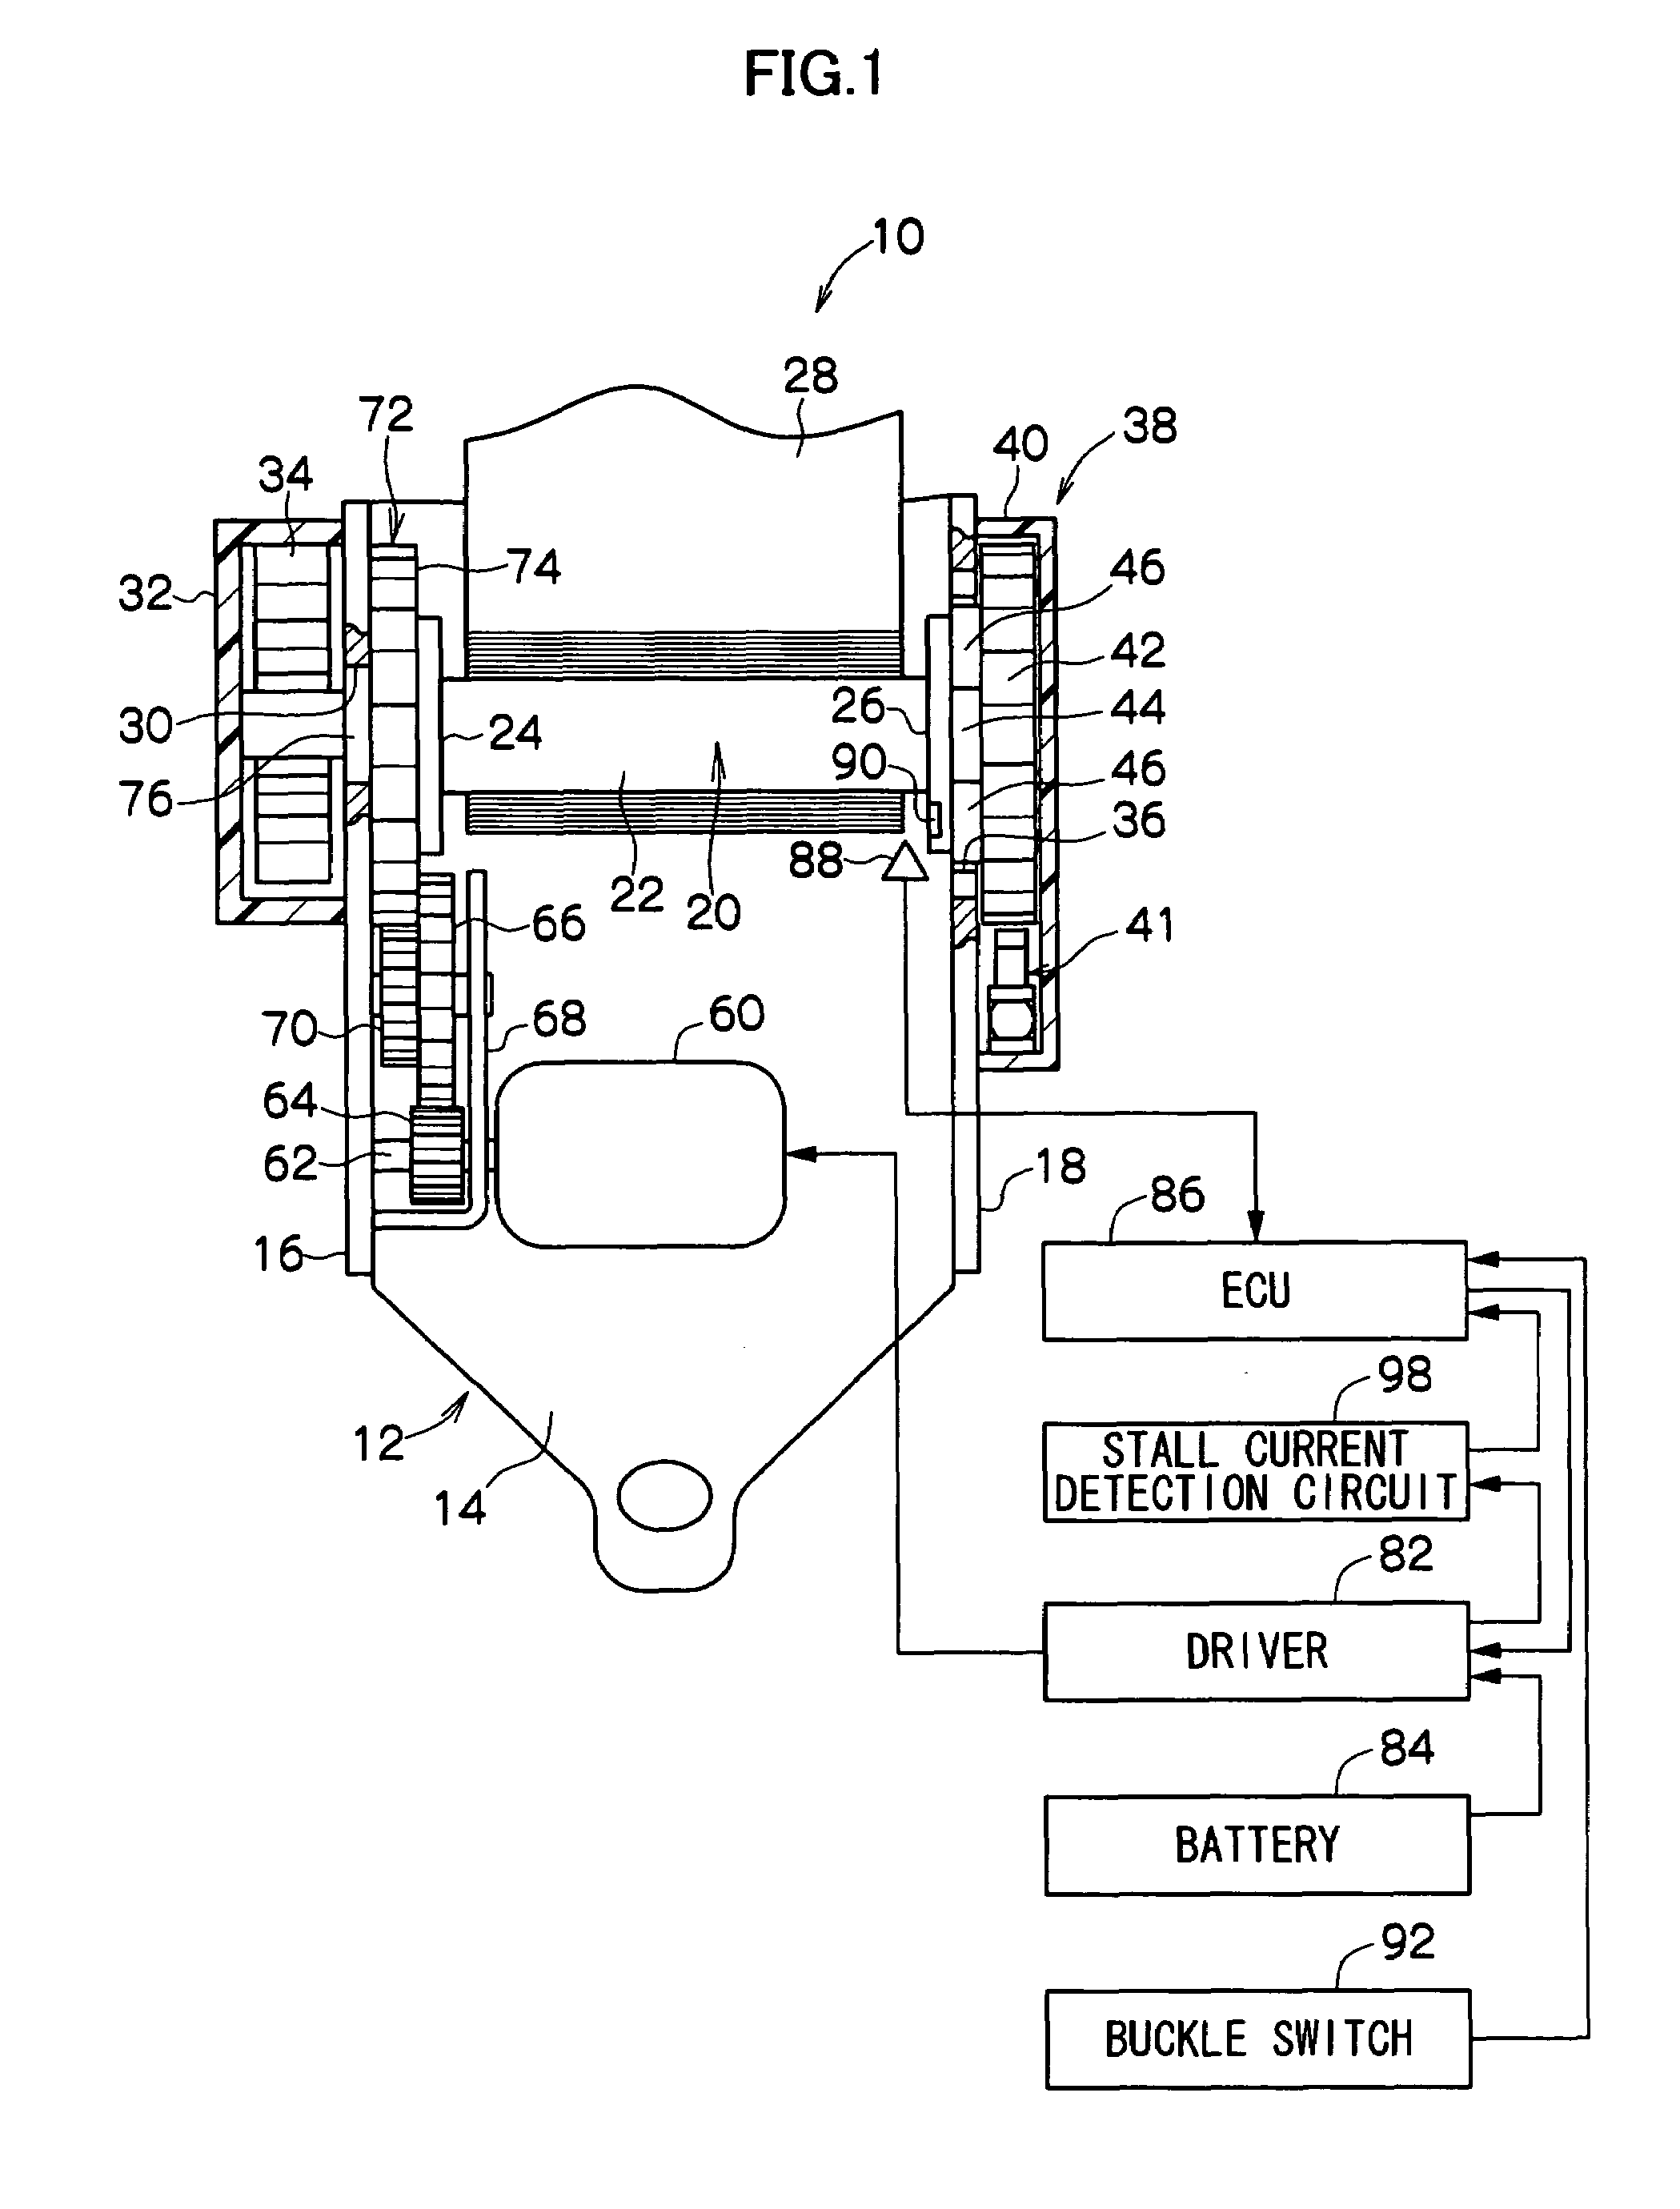 Motor retractor and drive control thereof